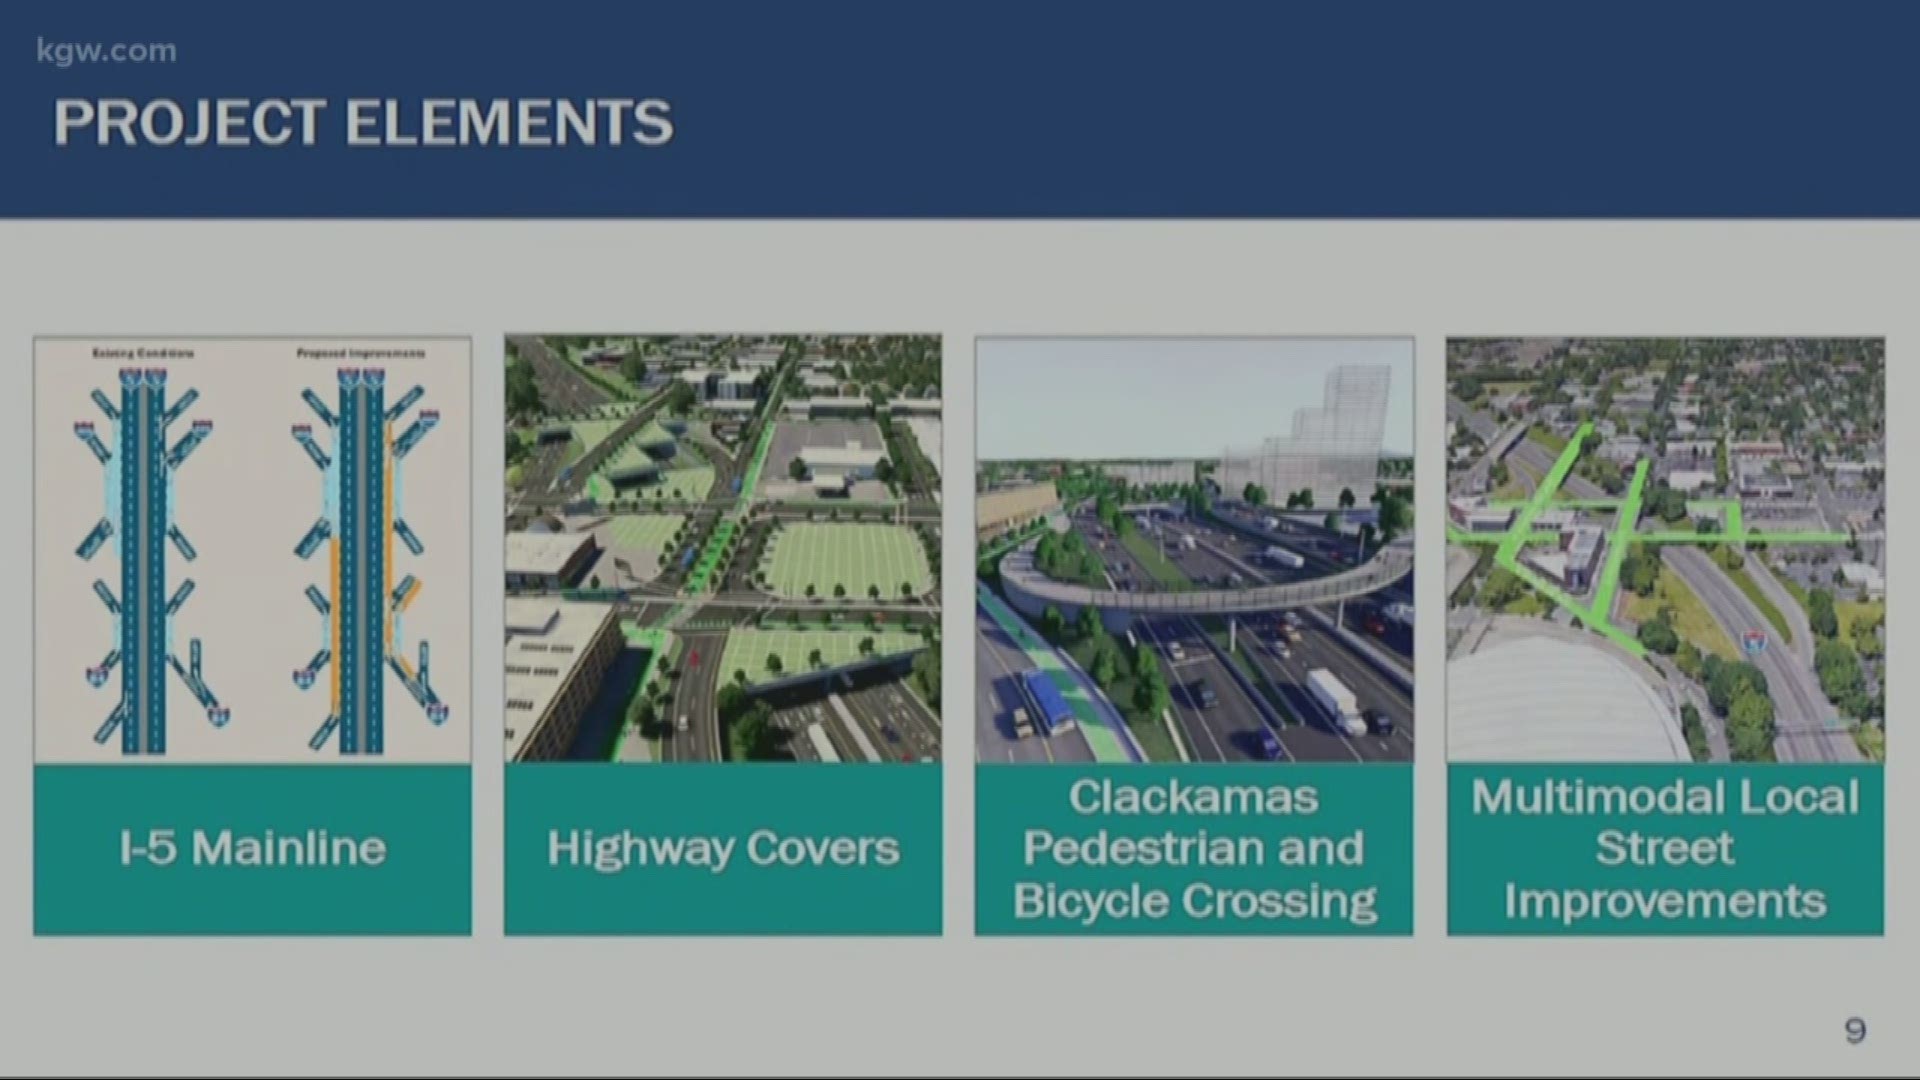 The $715 million-dollar plan would add merging lanes on both sides of I-5 between 405 and 84, among other features.